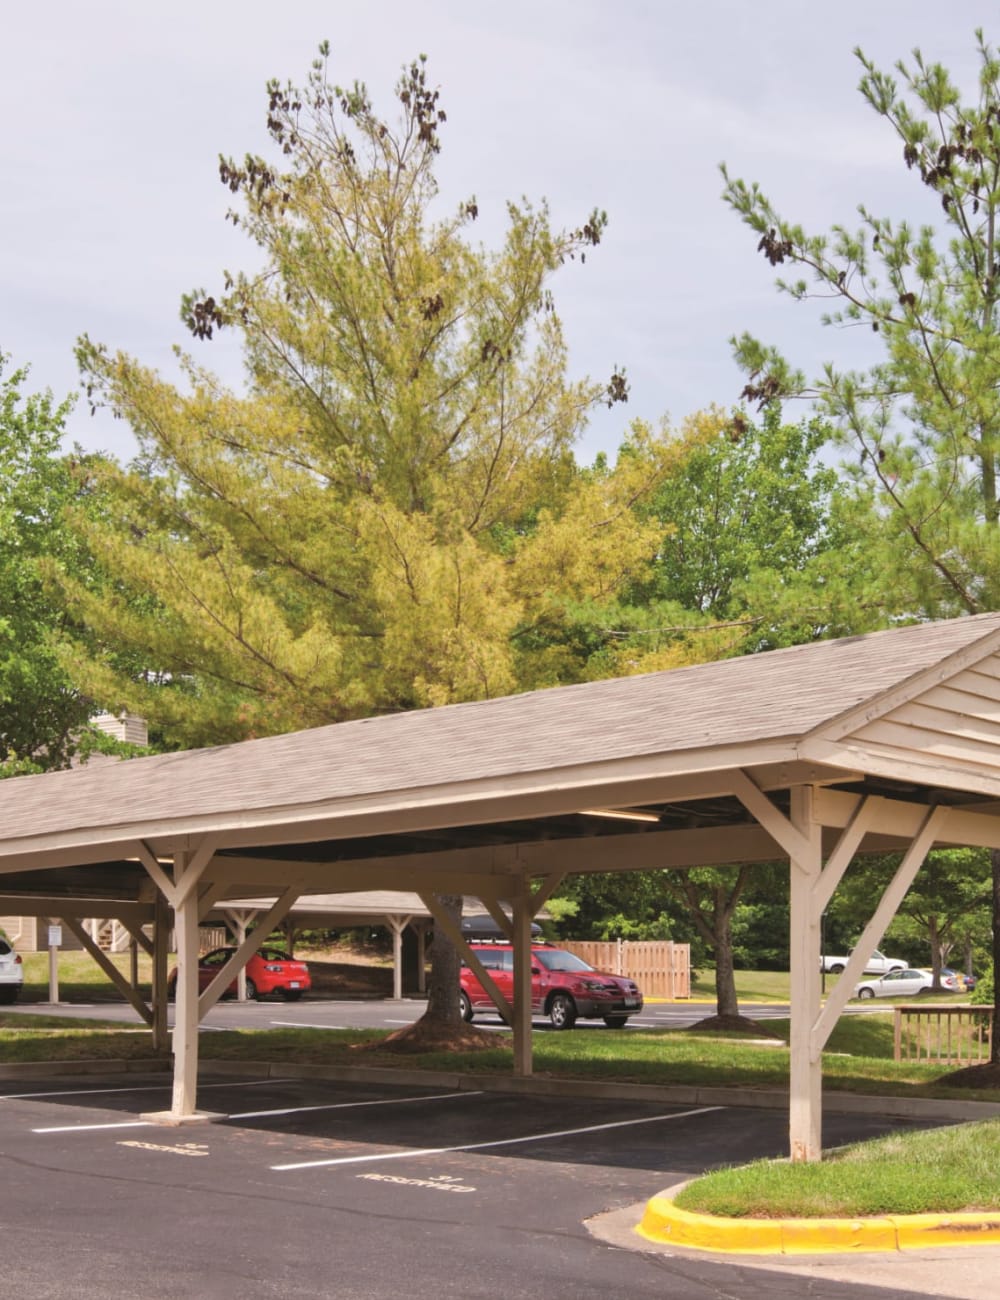 Covered parking spaces available at Springwoods at Lake Ridge in Woodbridge, Virginia